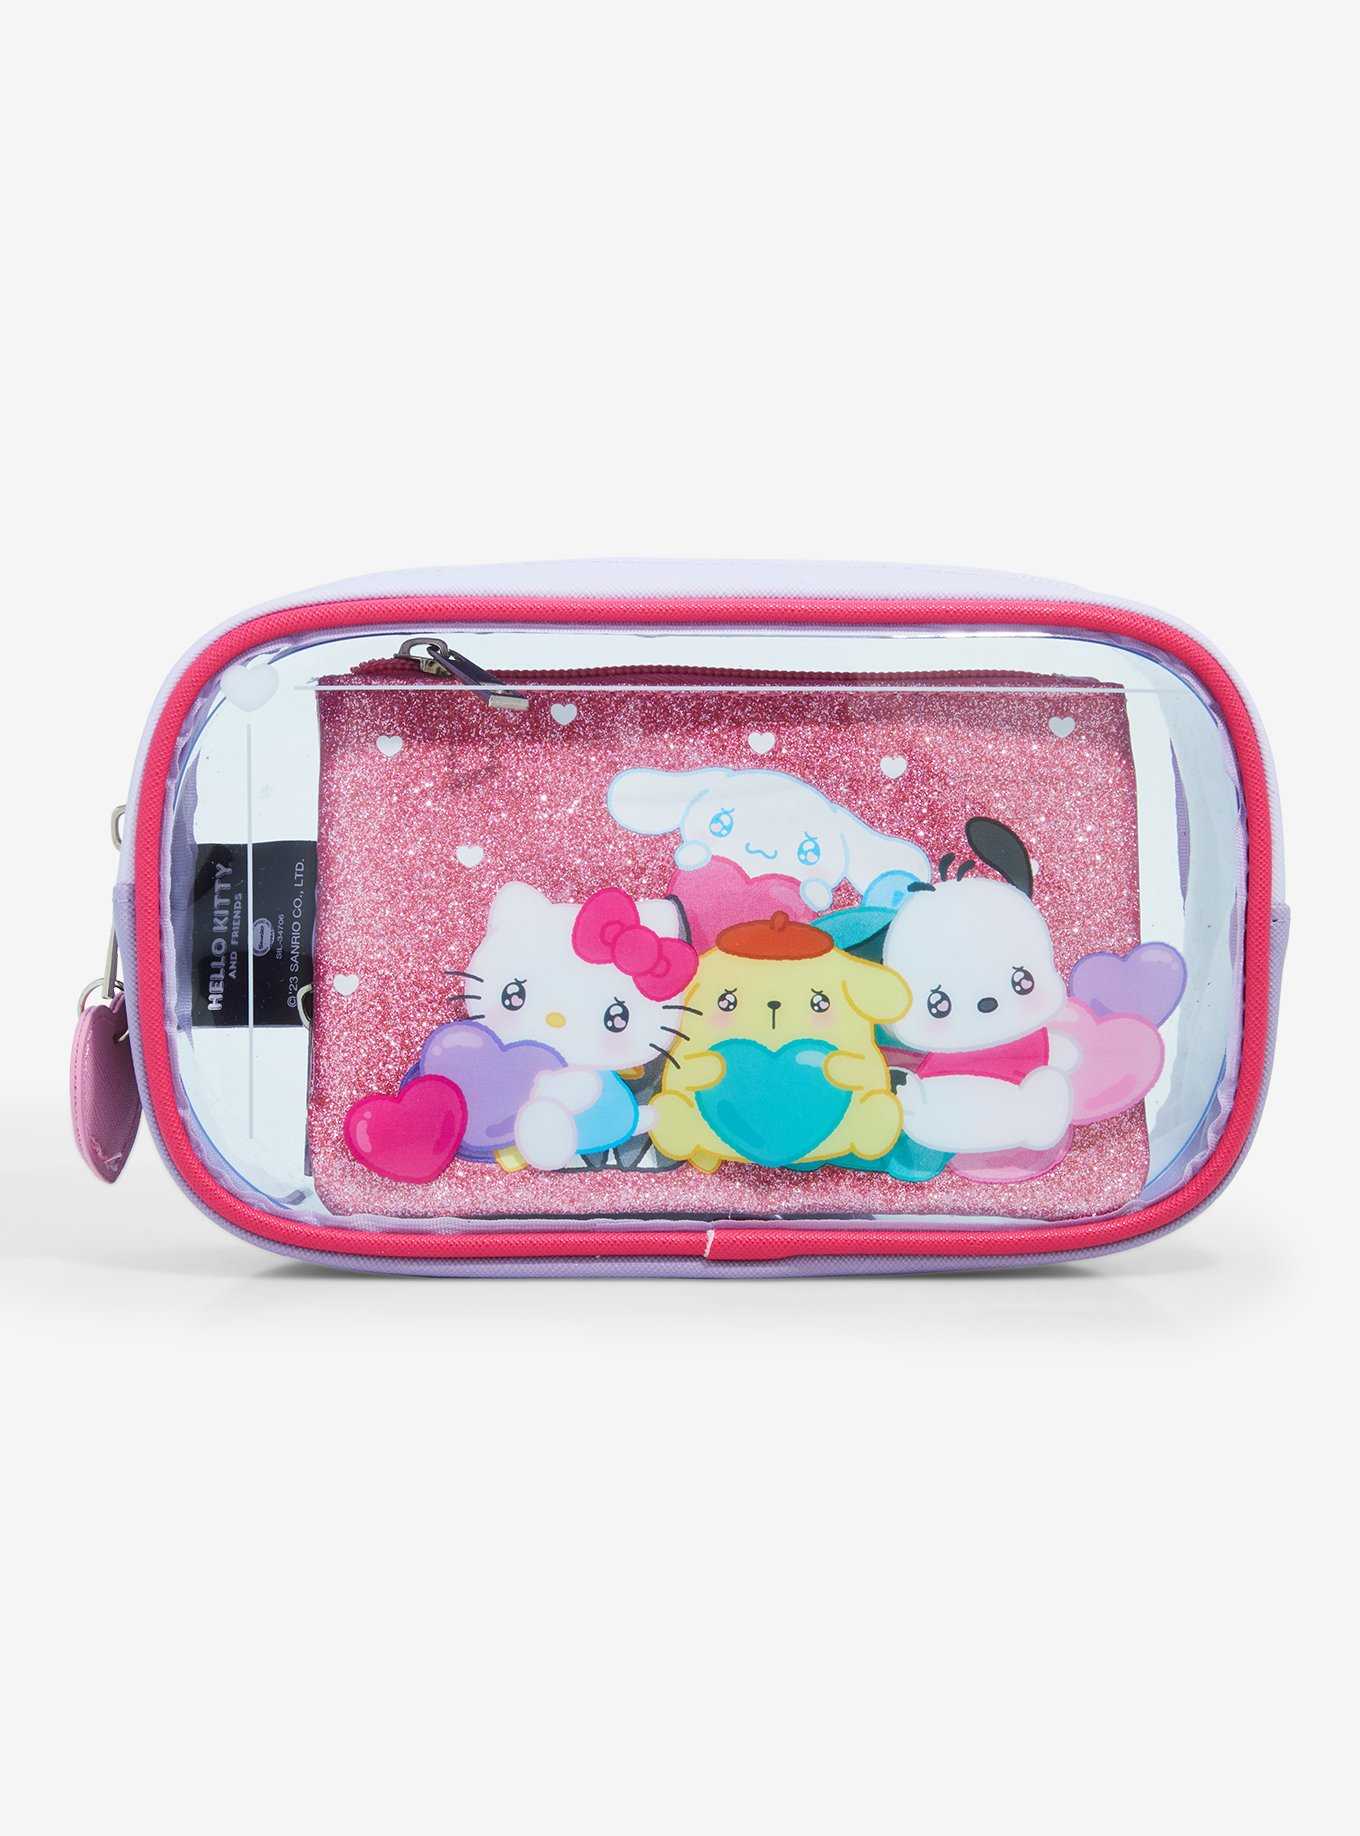 Hello Kitty Kuromi My Melody Little Twin Stars Cinnamoroll Pencil Case  Cosmetic Pouch Pen Bag 2-Side Opening for School Teen Girls Women Inspired  by You.